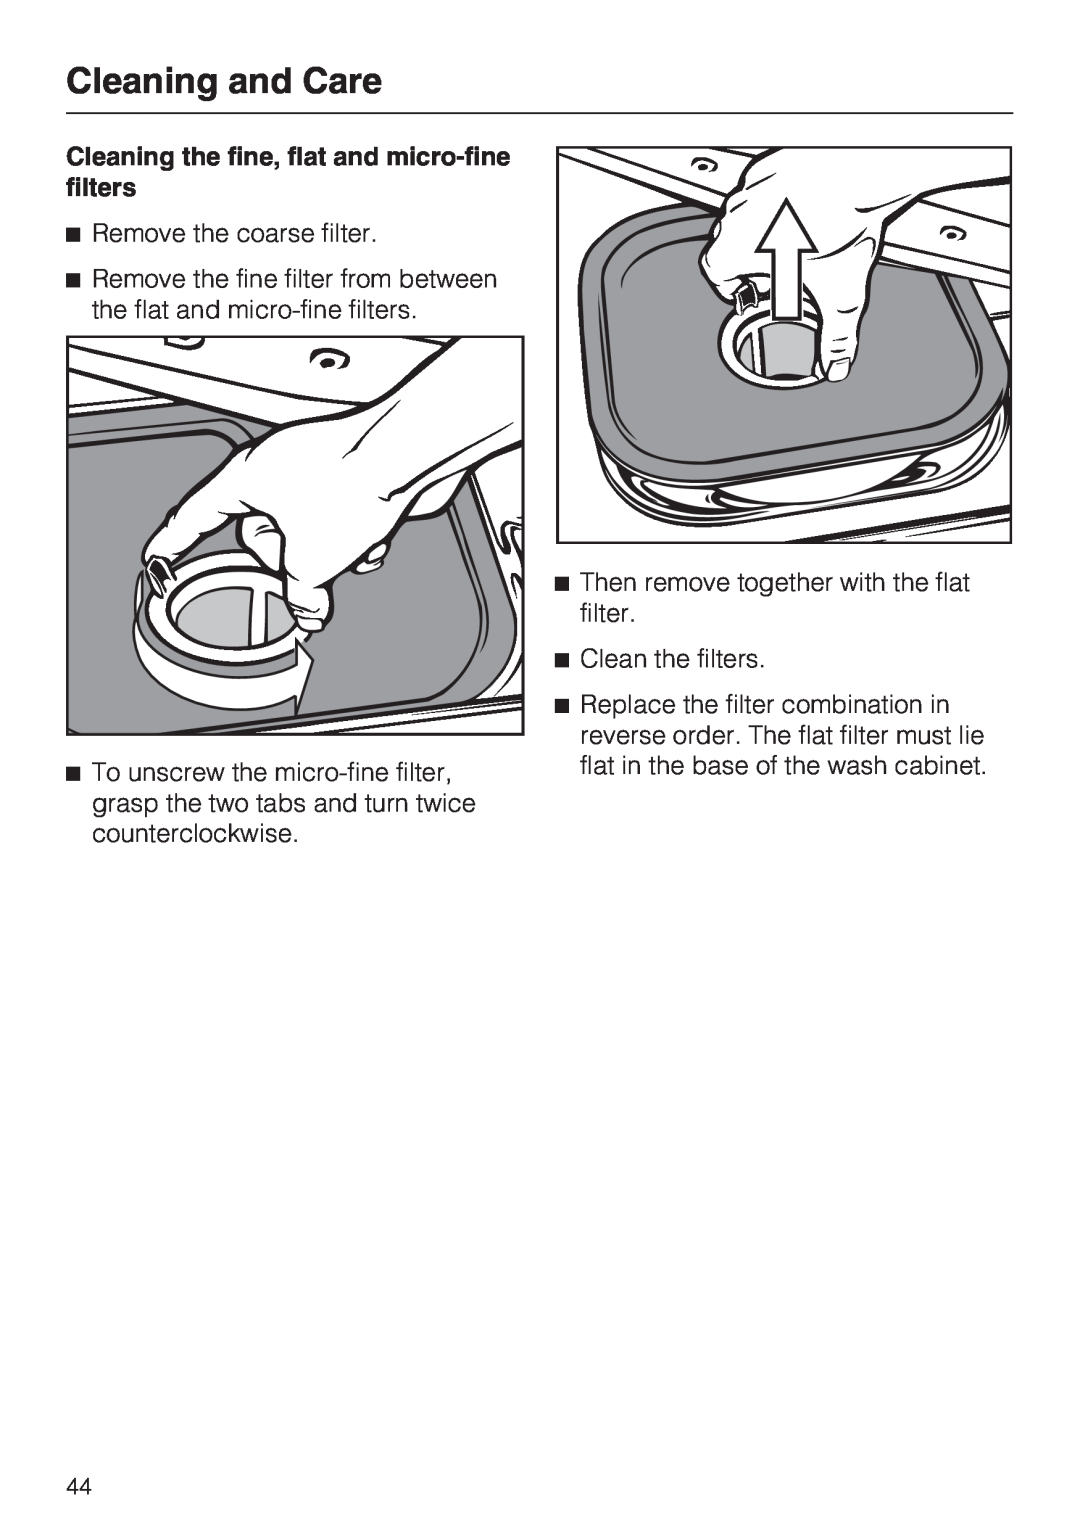 Miele G 7883 installation instructions Cleaning and Care, Cleaning the fine, flat and micro-finefilters 